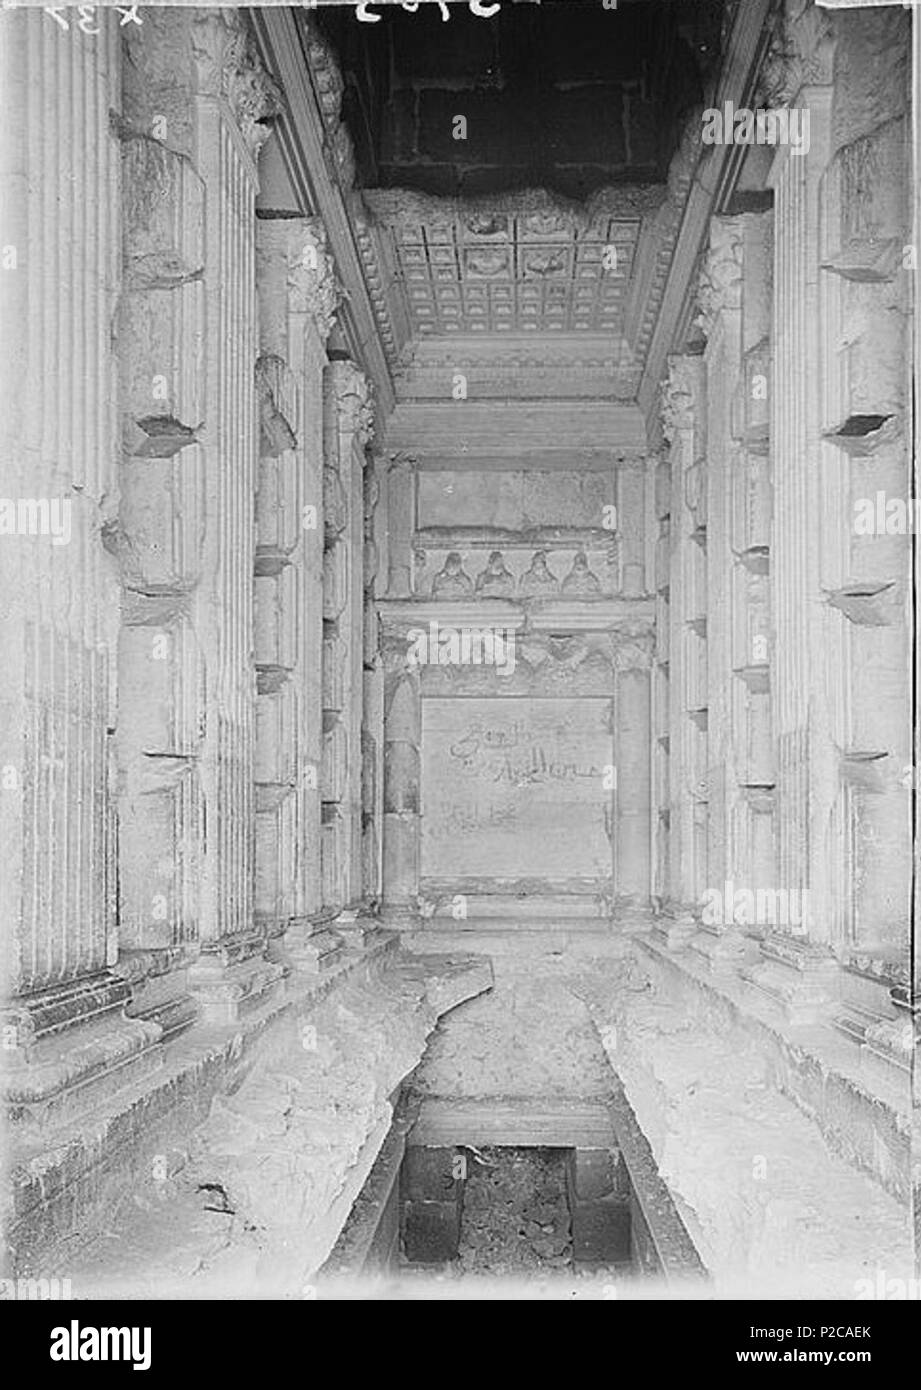 . ?????: ???? ?????? ?? ???? ????? ,?????, ?????, ?????? ????????? ?????? English: Palmyra. Tower tomb of Elahbel. Interior showing ceiling, pilasters and grave niches ; lower section showing crypt and carved busts . 1920. American Colony (Jerusalem). Photo 63 Tower of Elahbel - 02868v Stock Photo